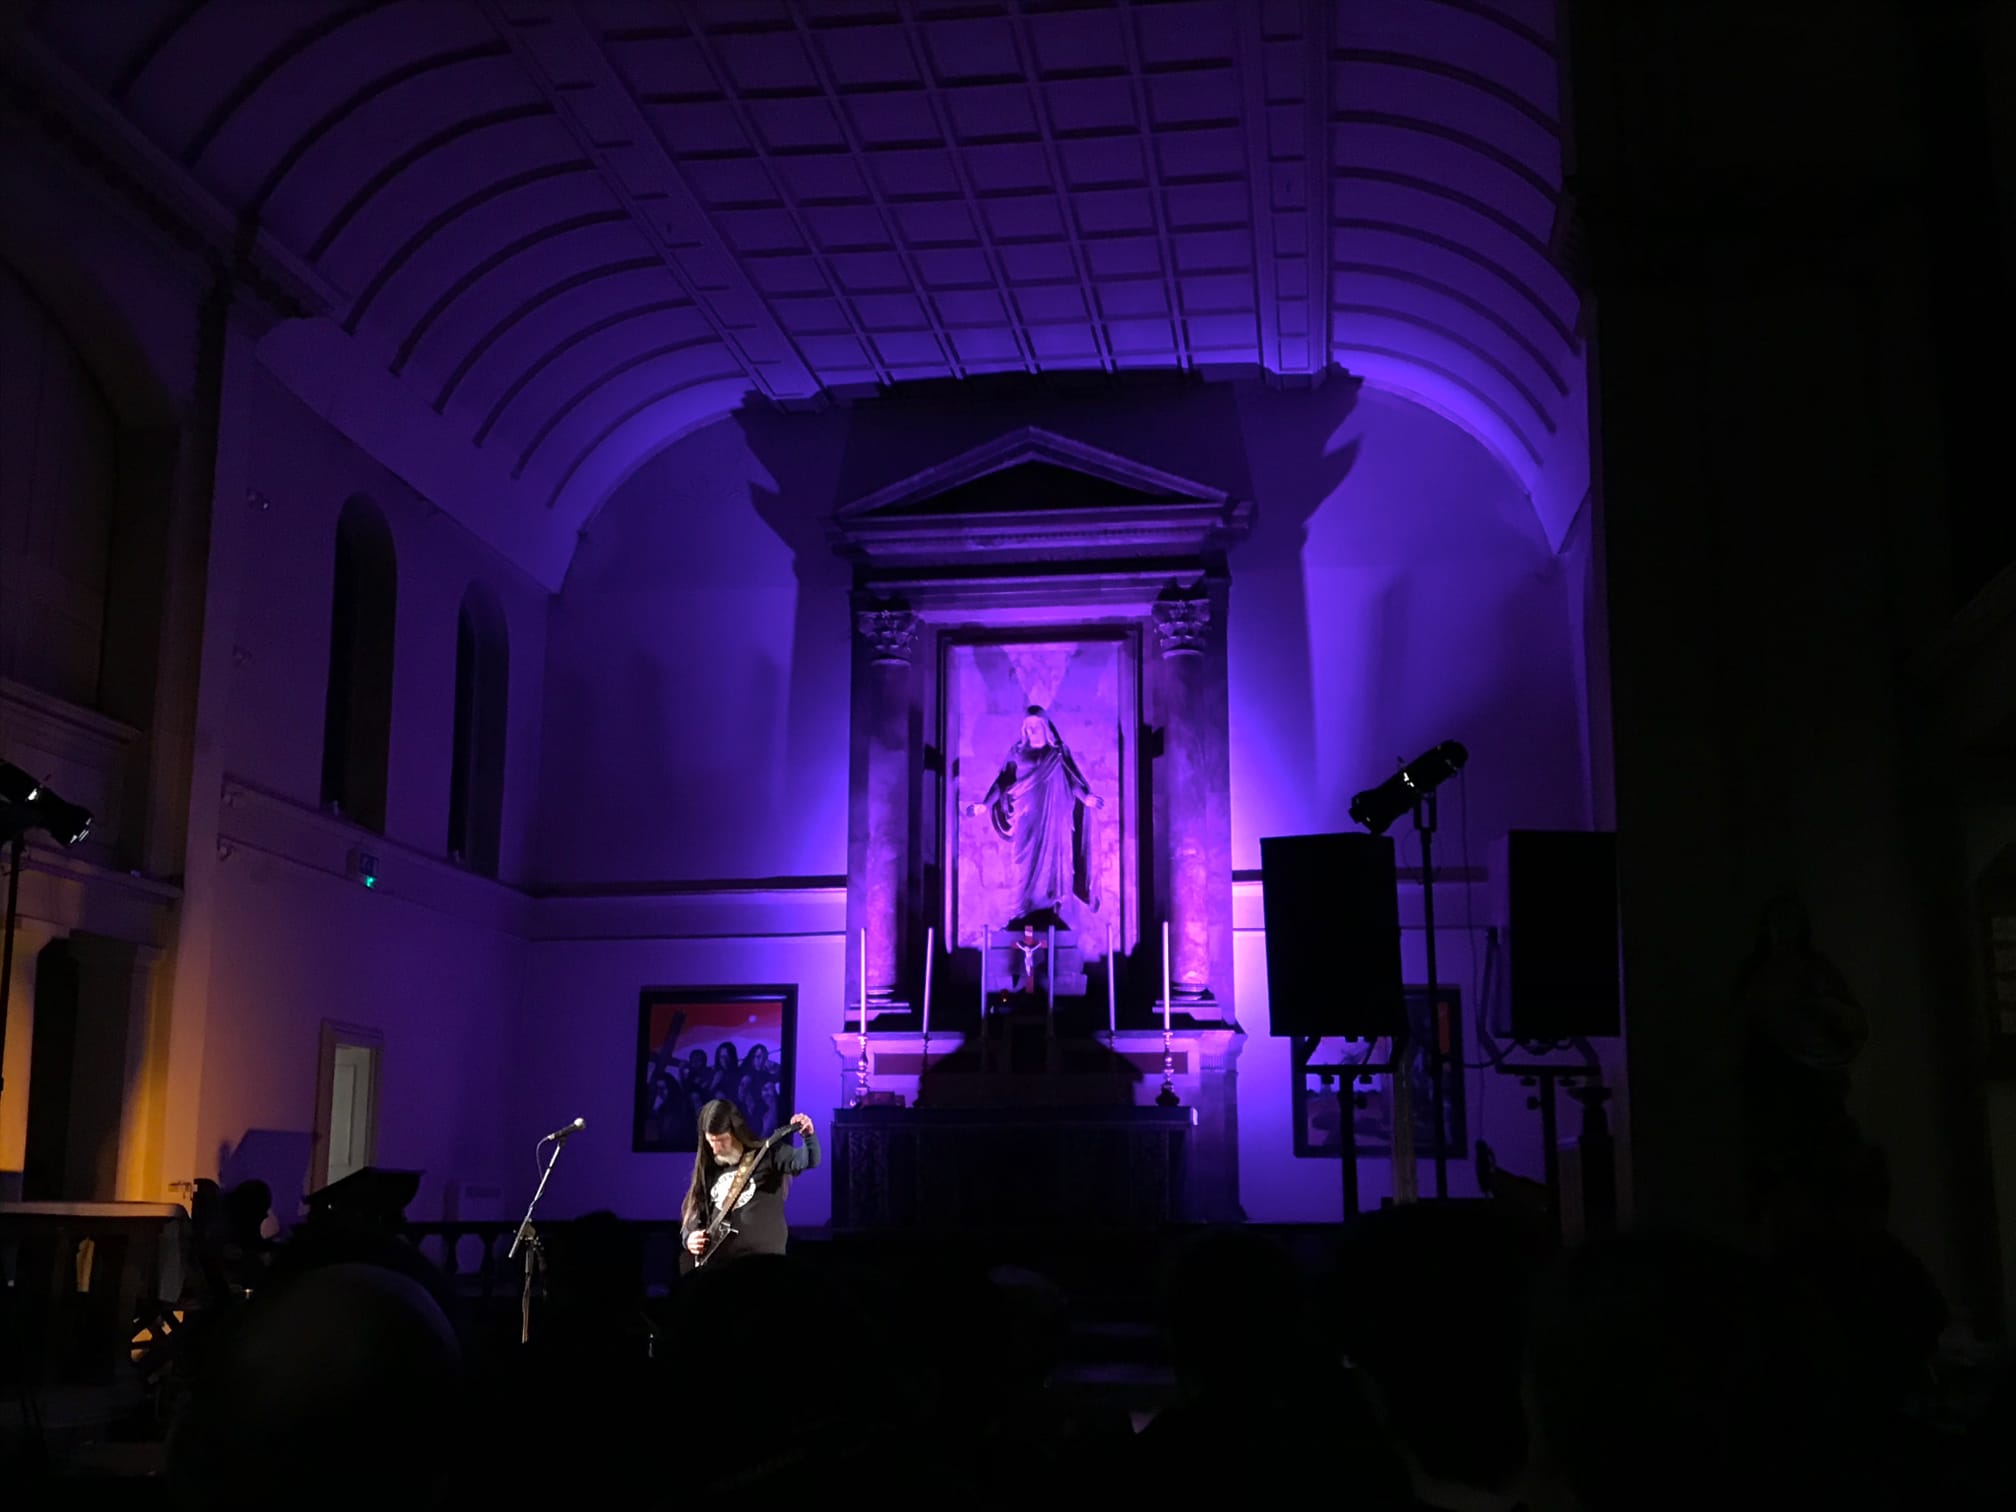 Dylan Carlson tuning his guitar in front of the altar at St John of Bethnal Green church, bathed in purple floodlights